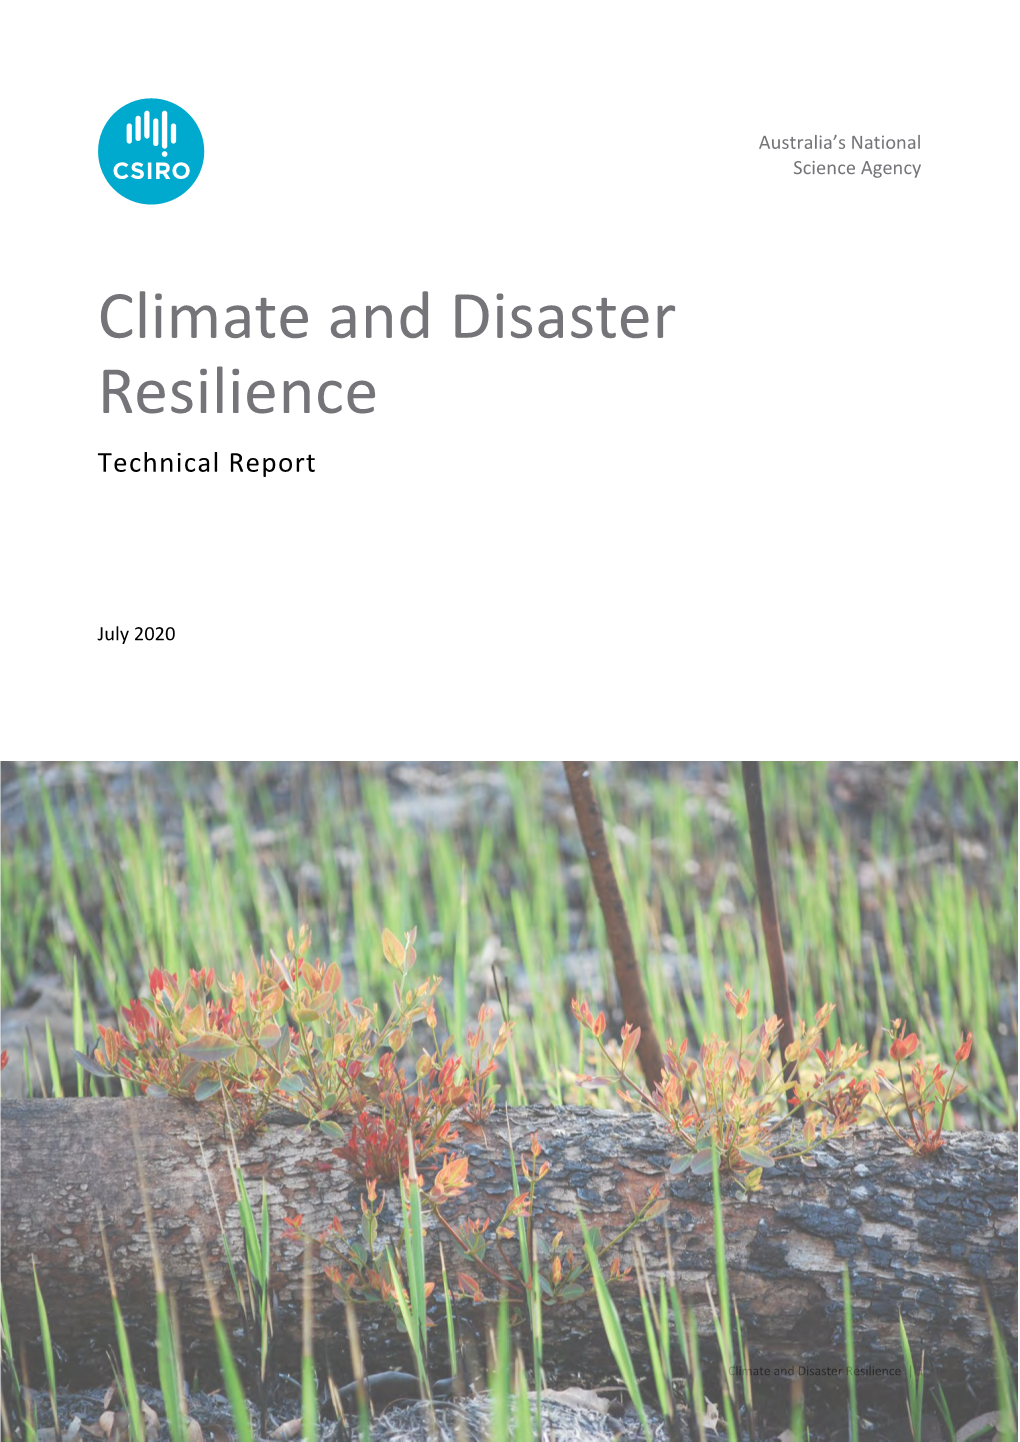 Climate and Disaster Resilience (Technical Report)